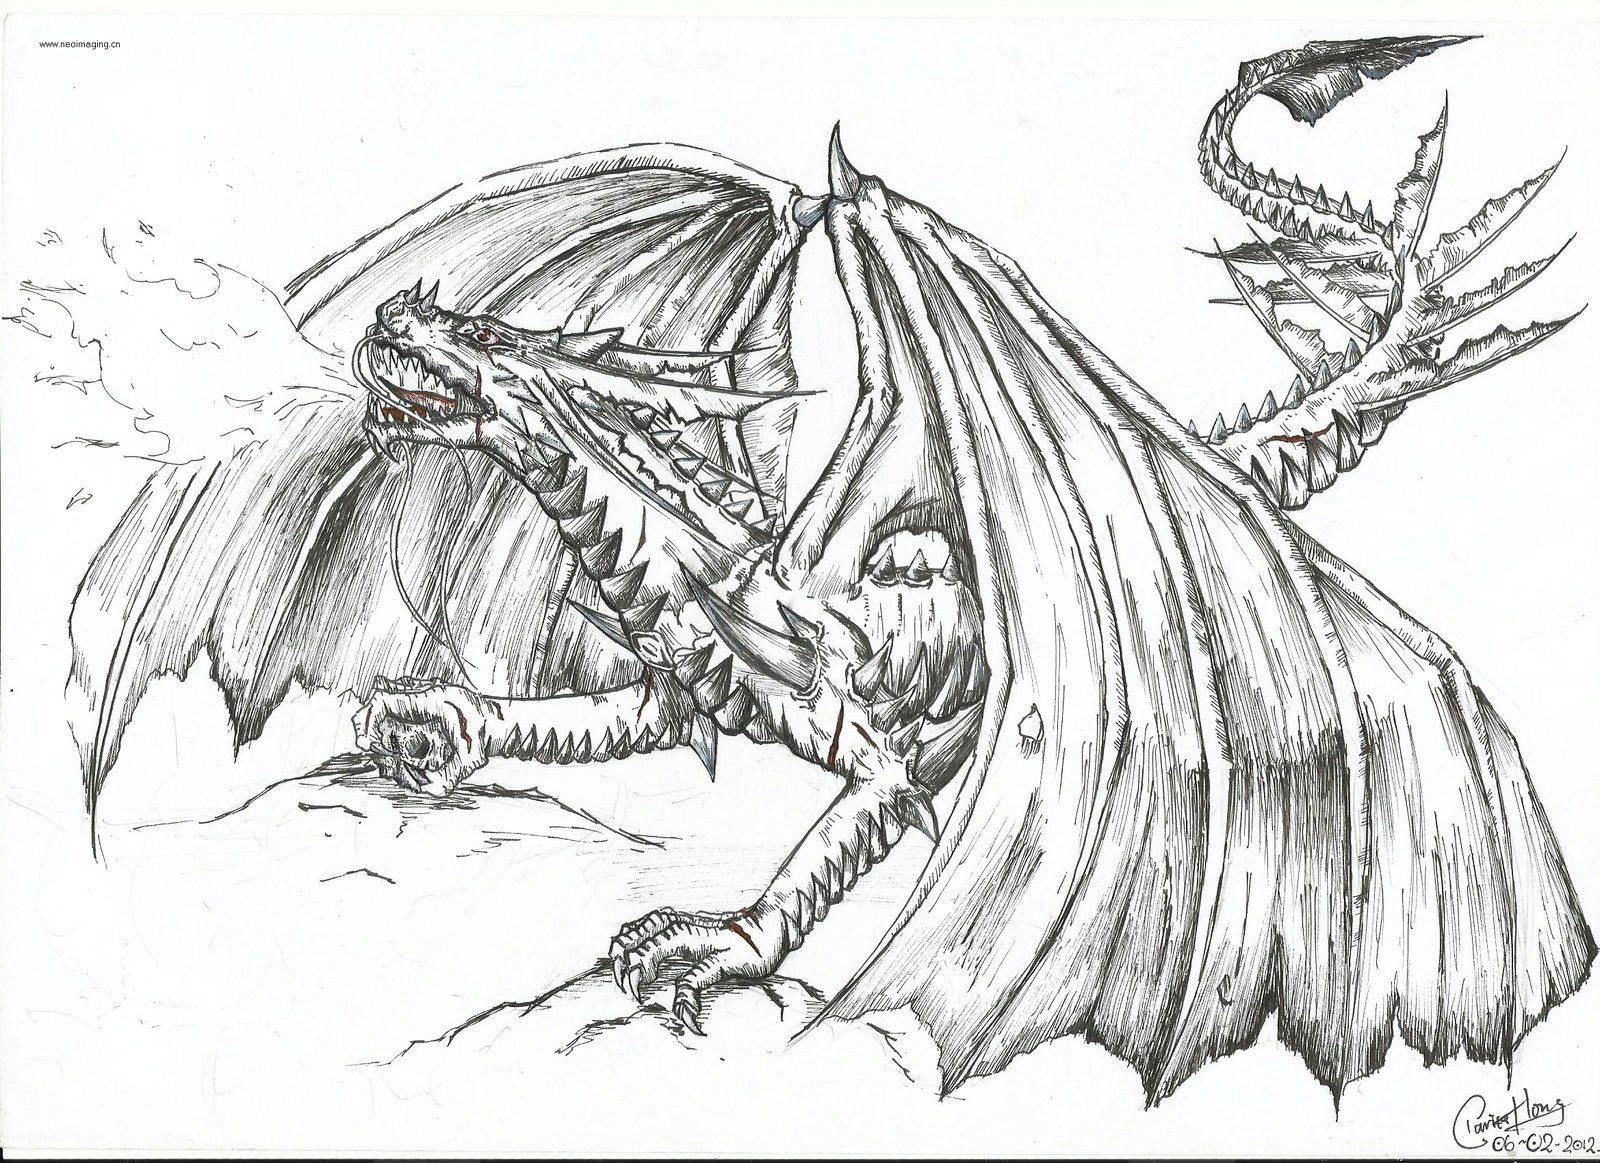 the fire breathing dragon by dino wolf on deviantart